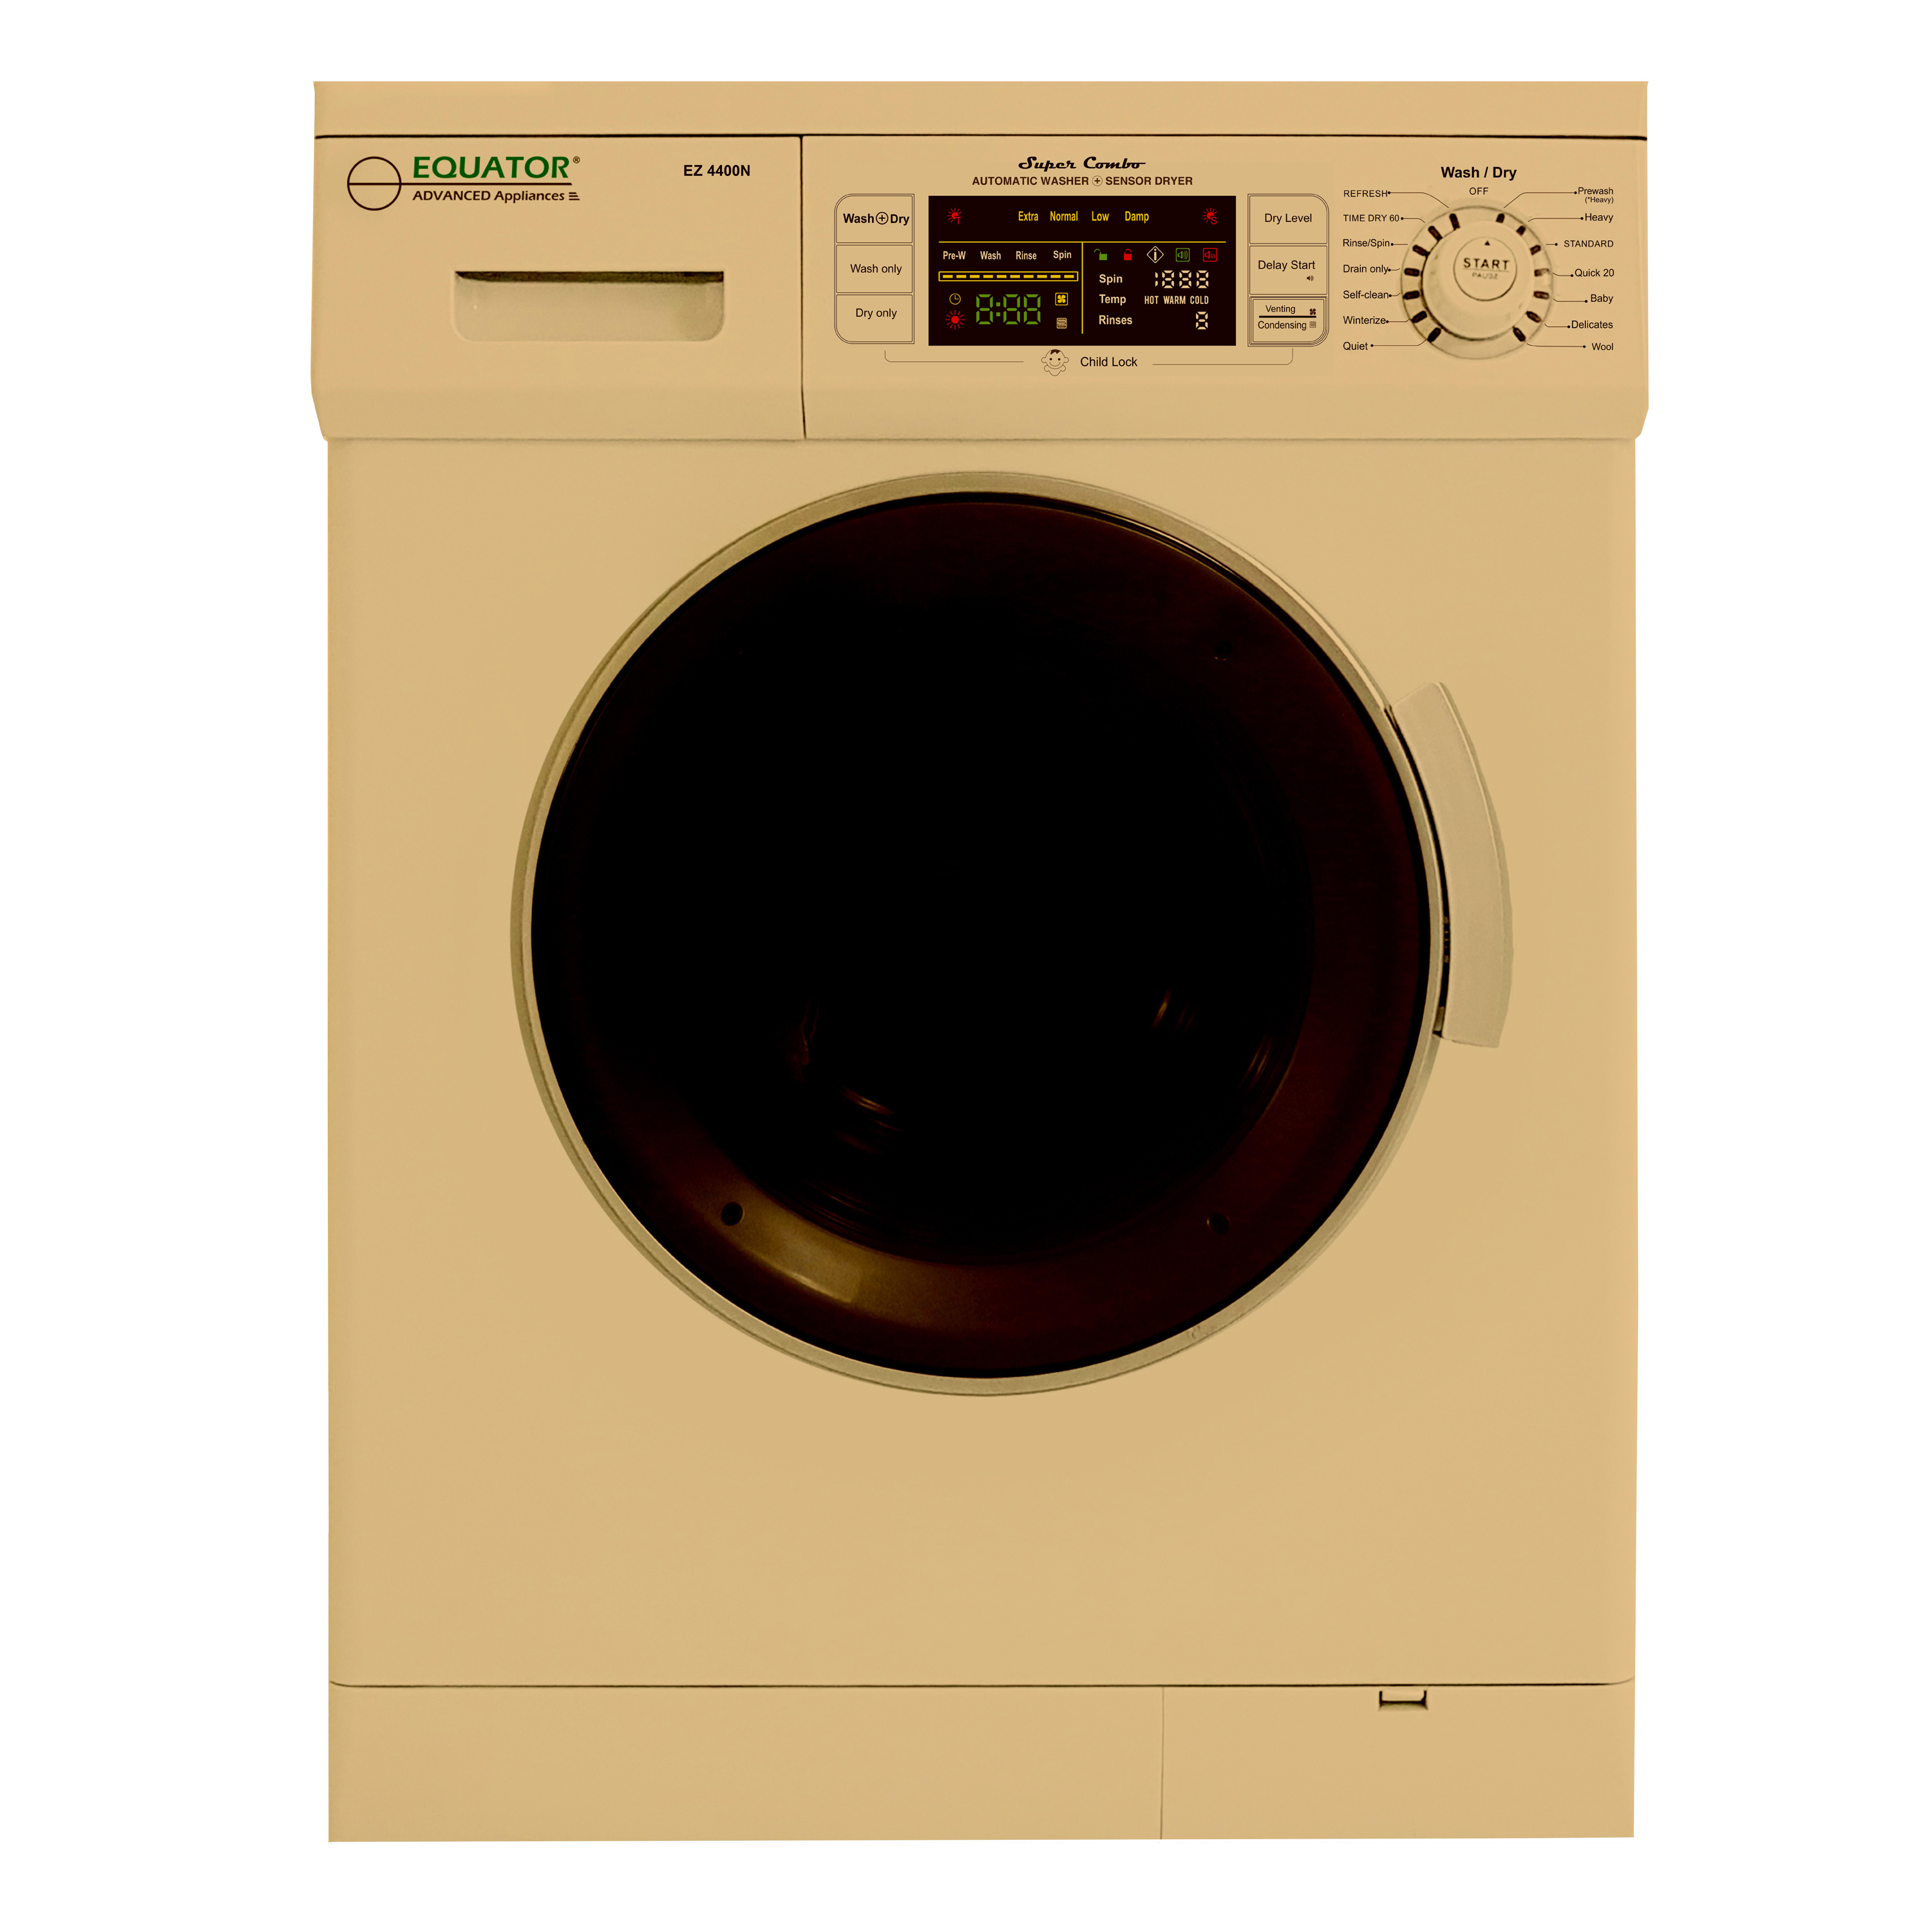 Equator Version 2 Pro Compact 13 lbs Combination Washer DryerVented/Ventless Dry, Winterize, Quiet, Easy to Use Controls (Gold)